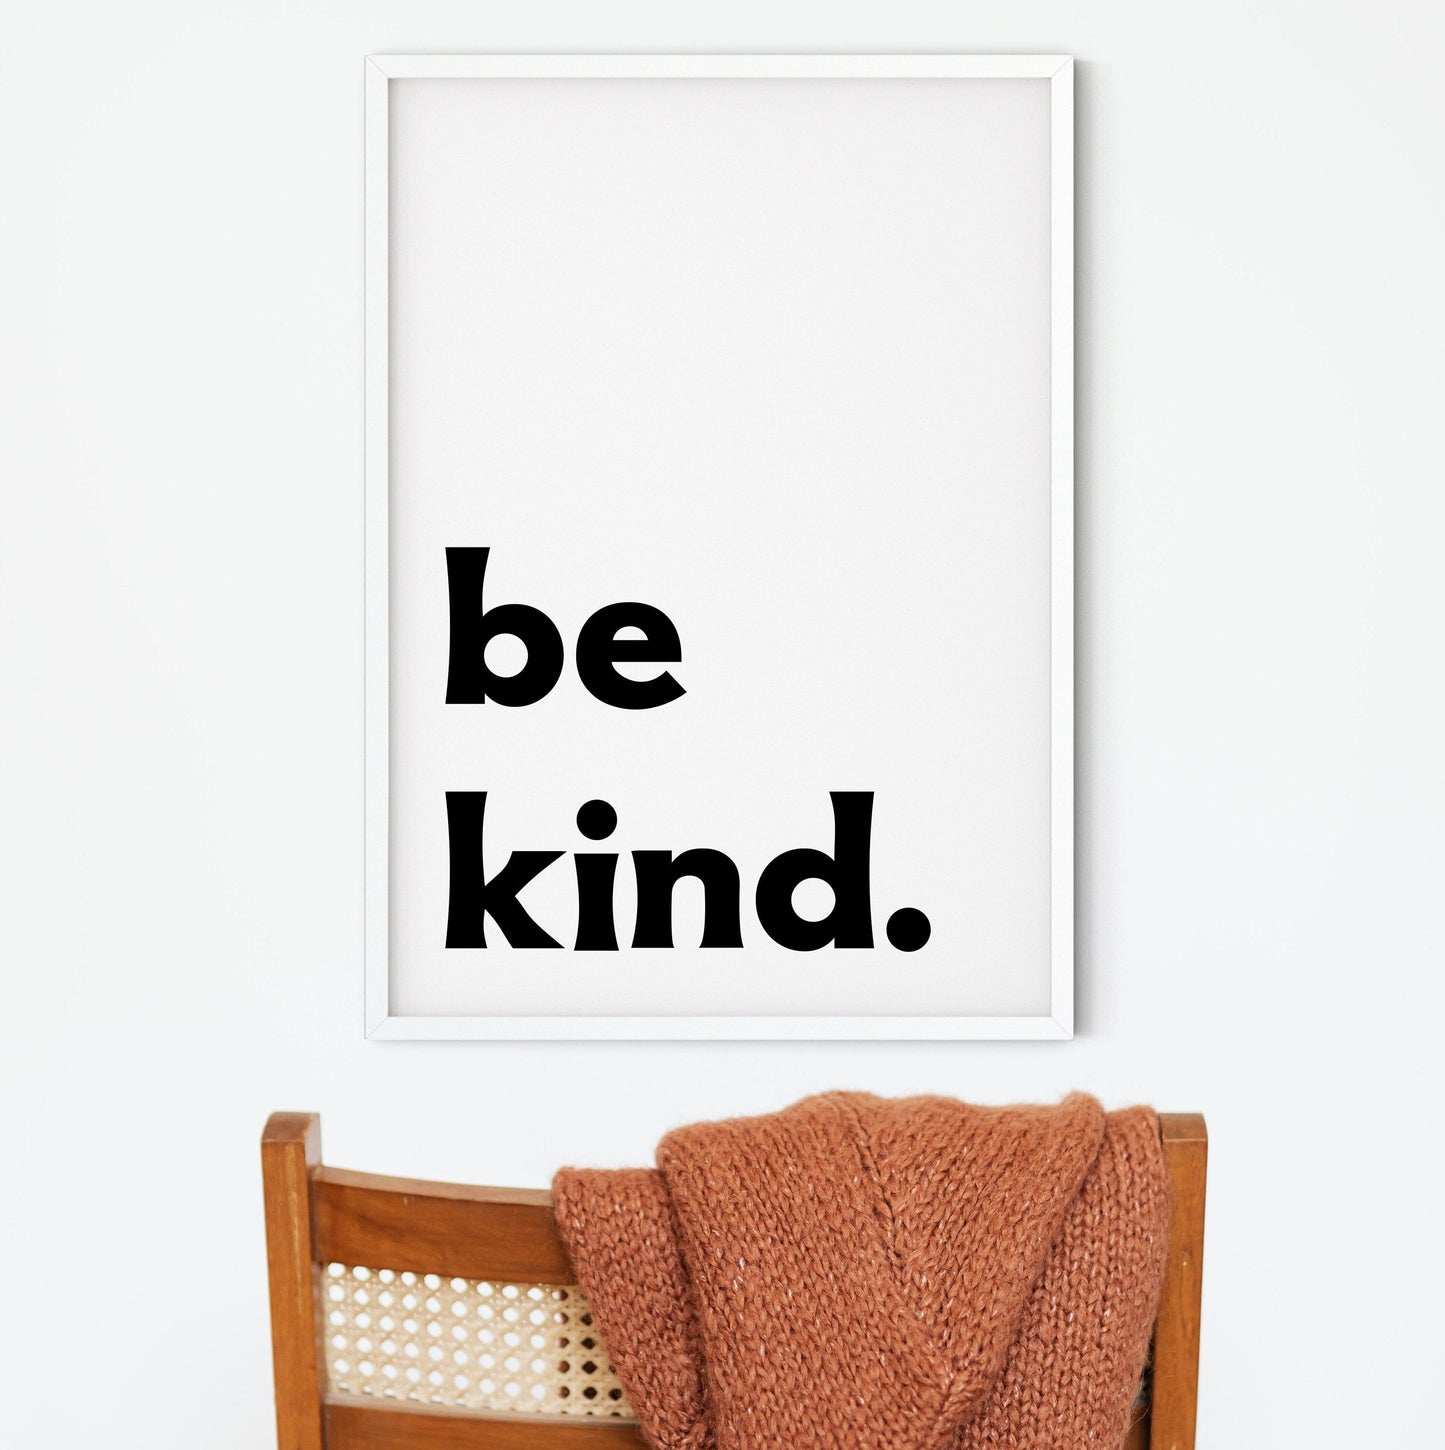 Framed be kind print, Kitchen quote prints, positive quote prints quote prints